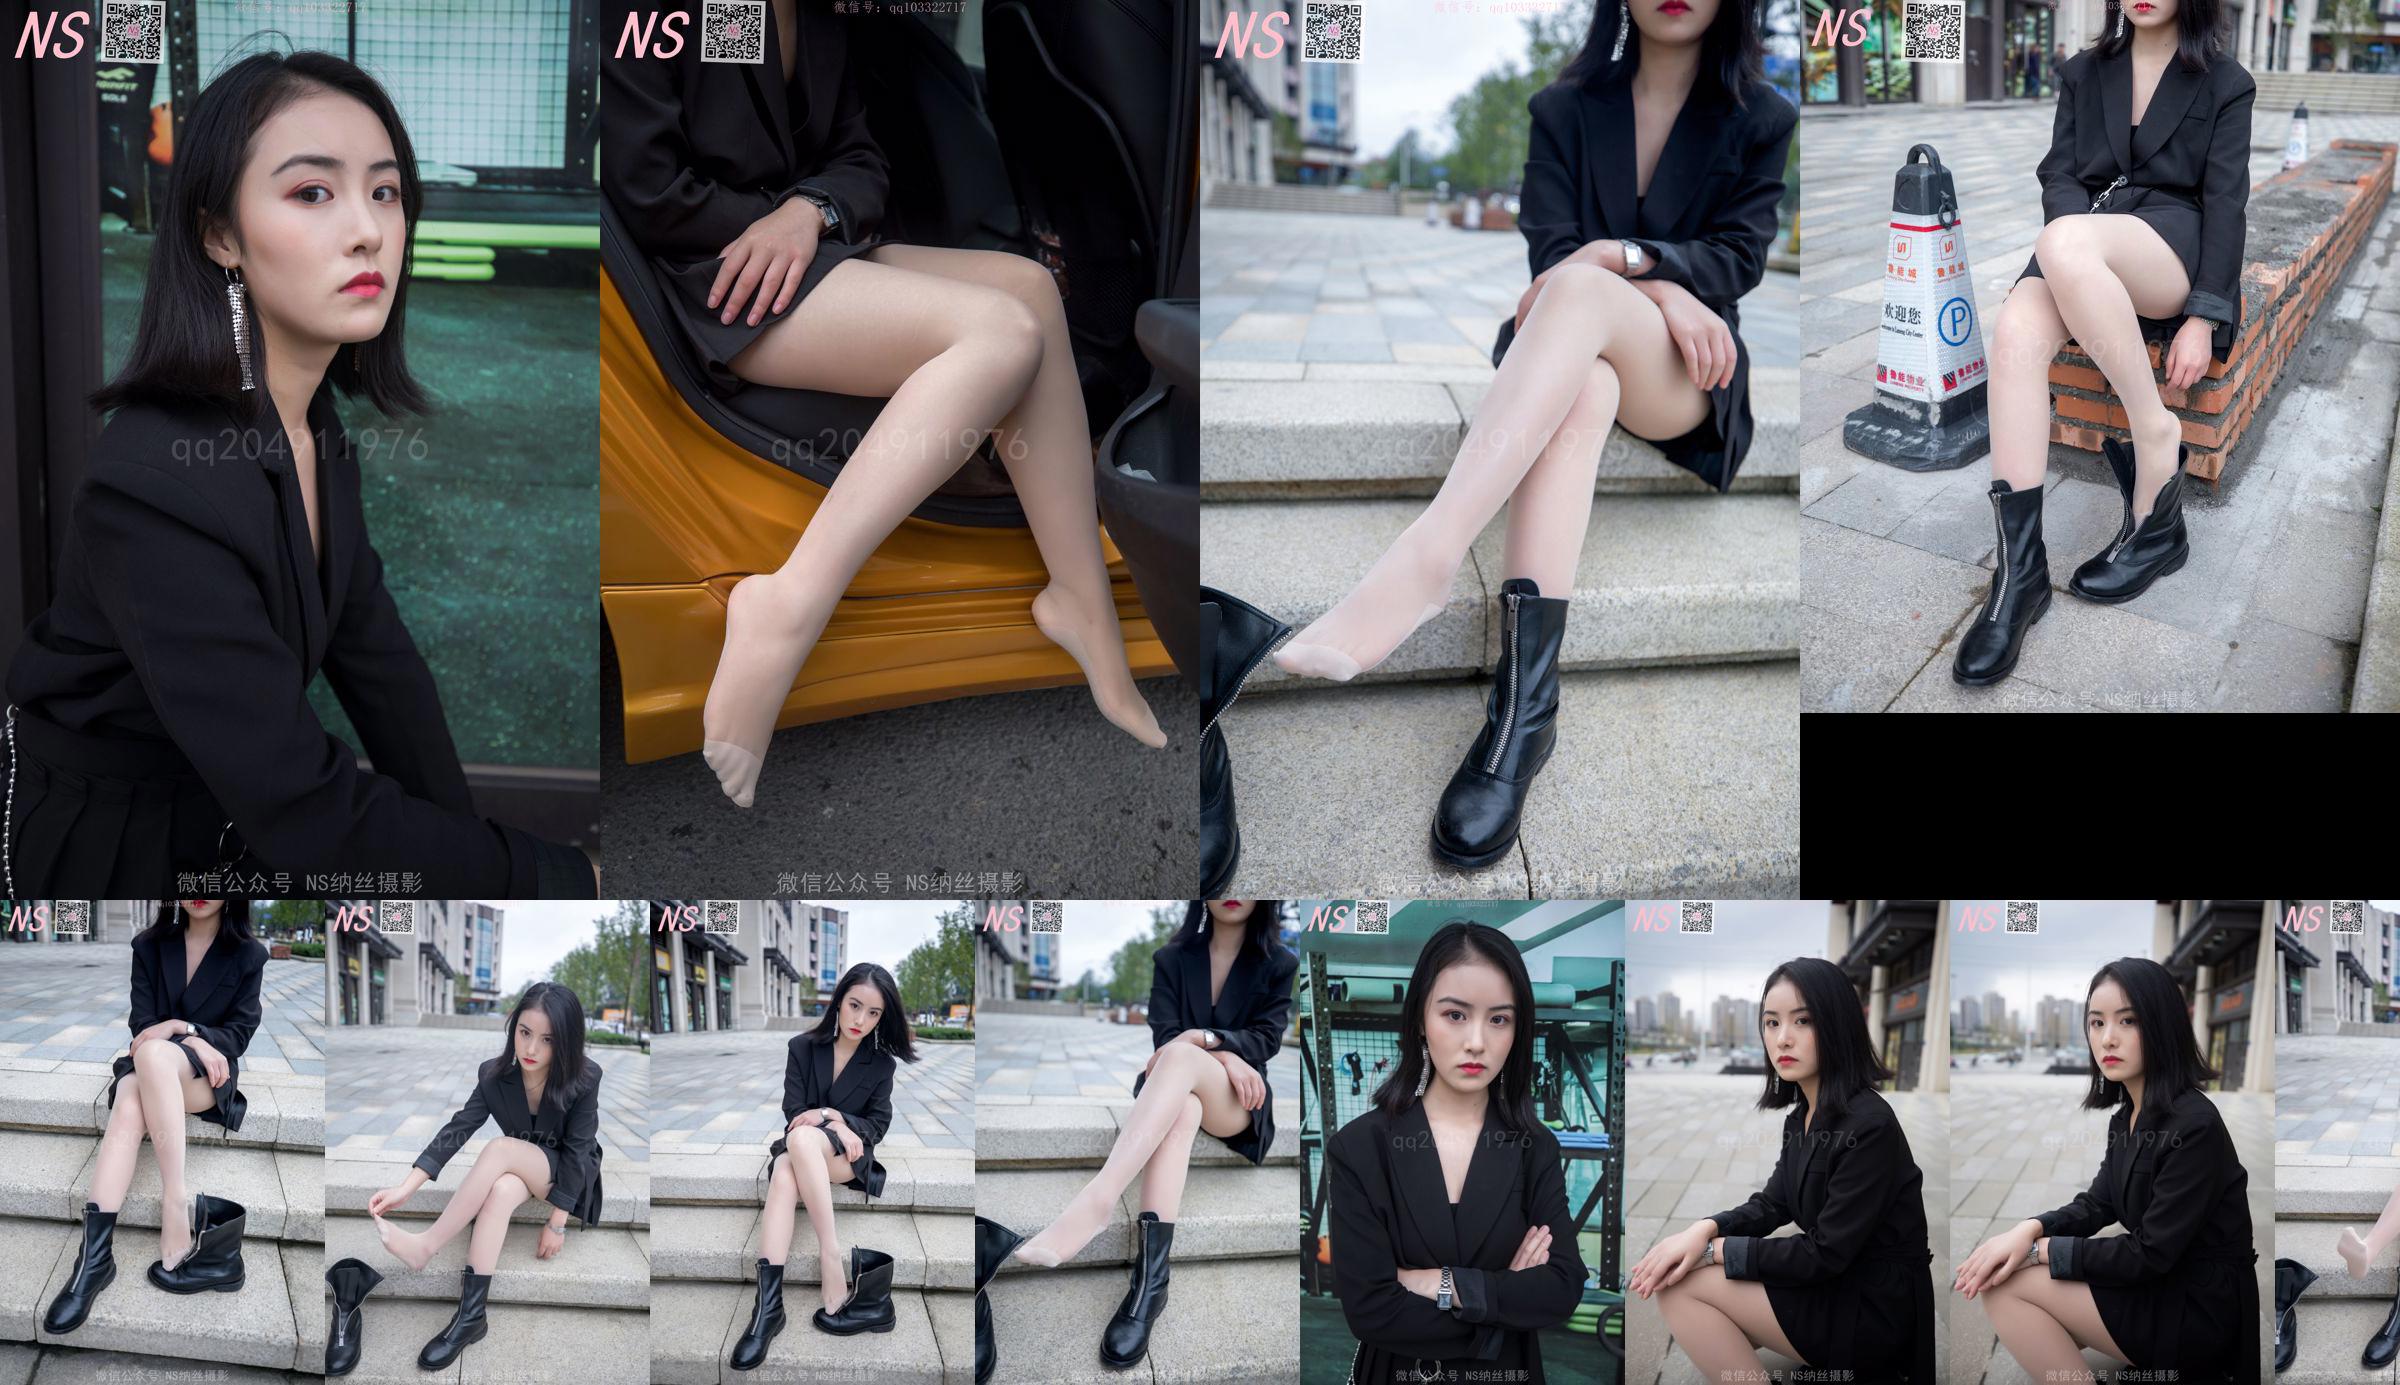 Yishuang "Special Wonderful Boots and Bas" [Nass Photography] No.a28049 Page 4